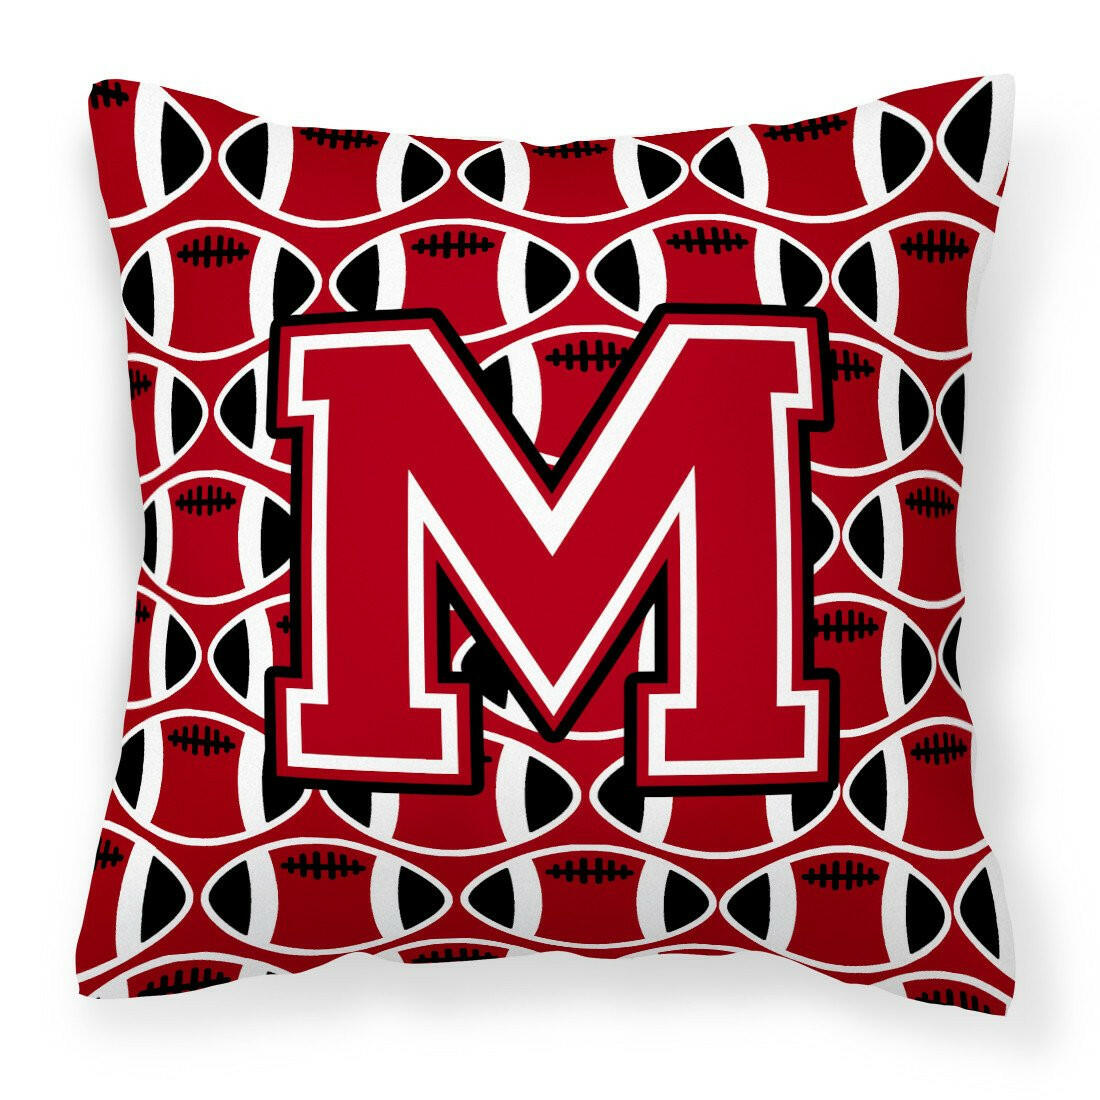 Letter M Football Red, Black and White Fabric Decorative Pillow CJ1073-MPW1414 by Caroline's Treasures